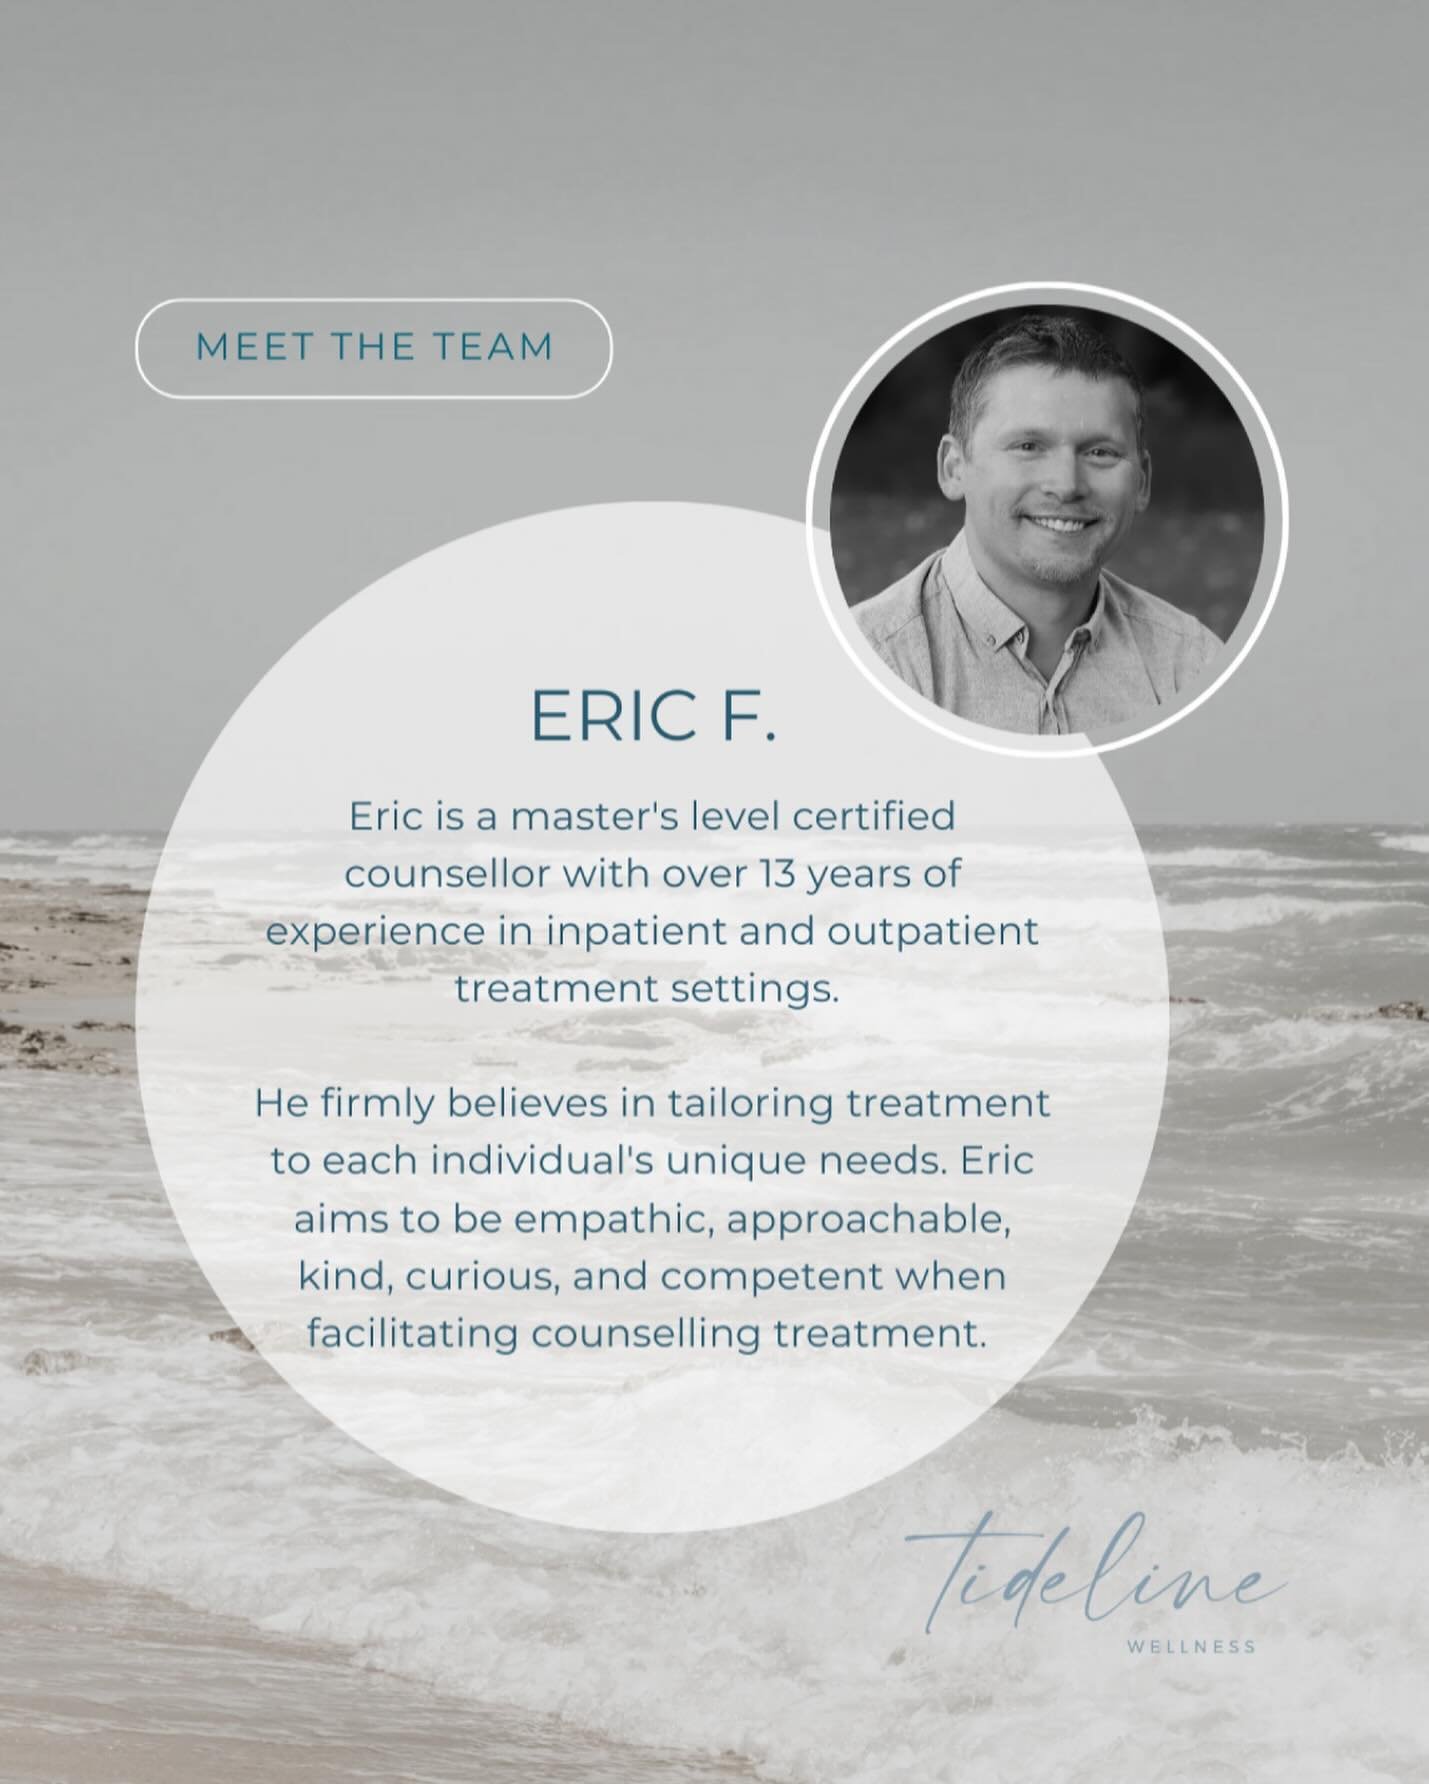 @tidelinewellness is extending a warm welcome to the newest addition to our team! 

👏 Meet Eric - our master&rsquo; s-level certified counsellor with over 13 years of experience in inpatient and outpatient treatment settings. 

When you step into an